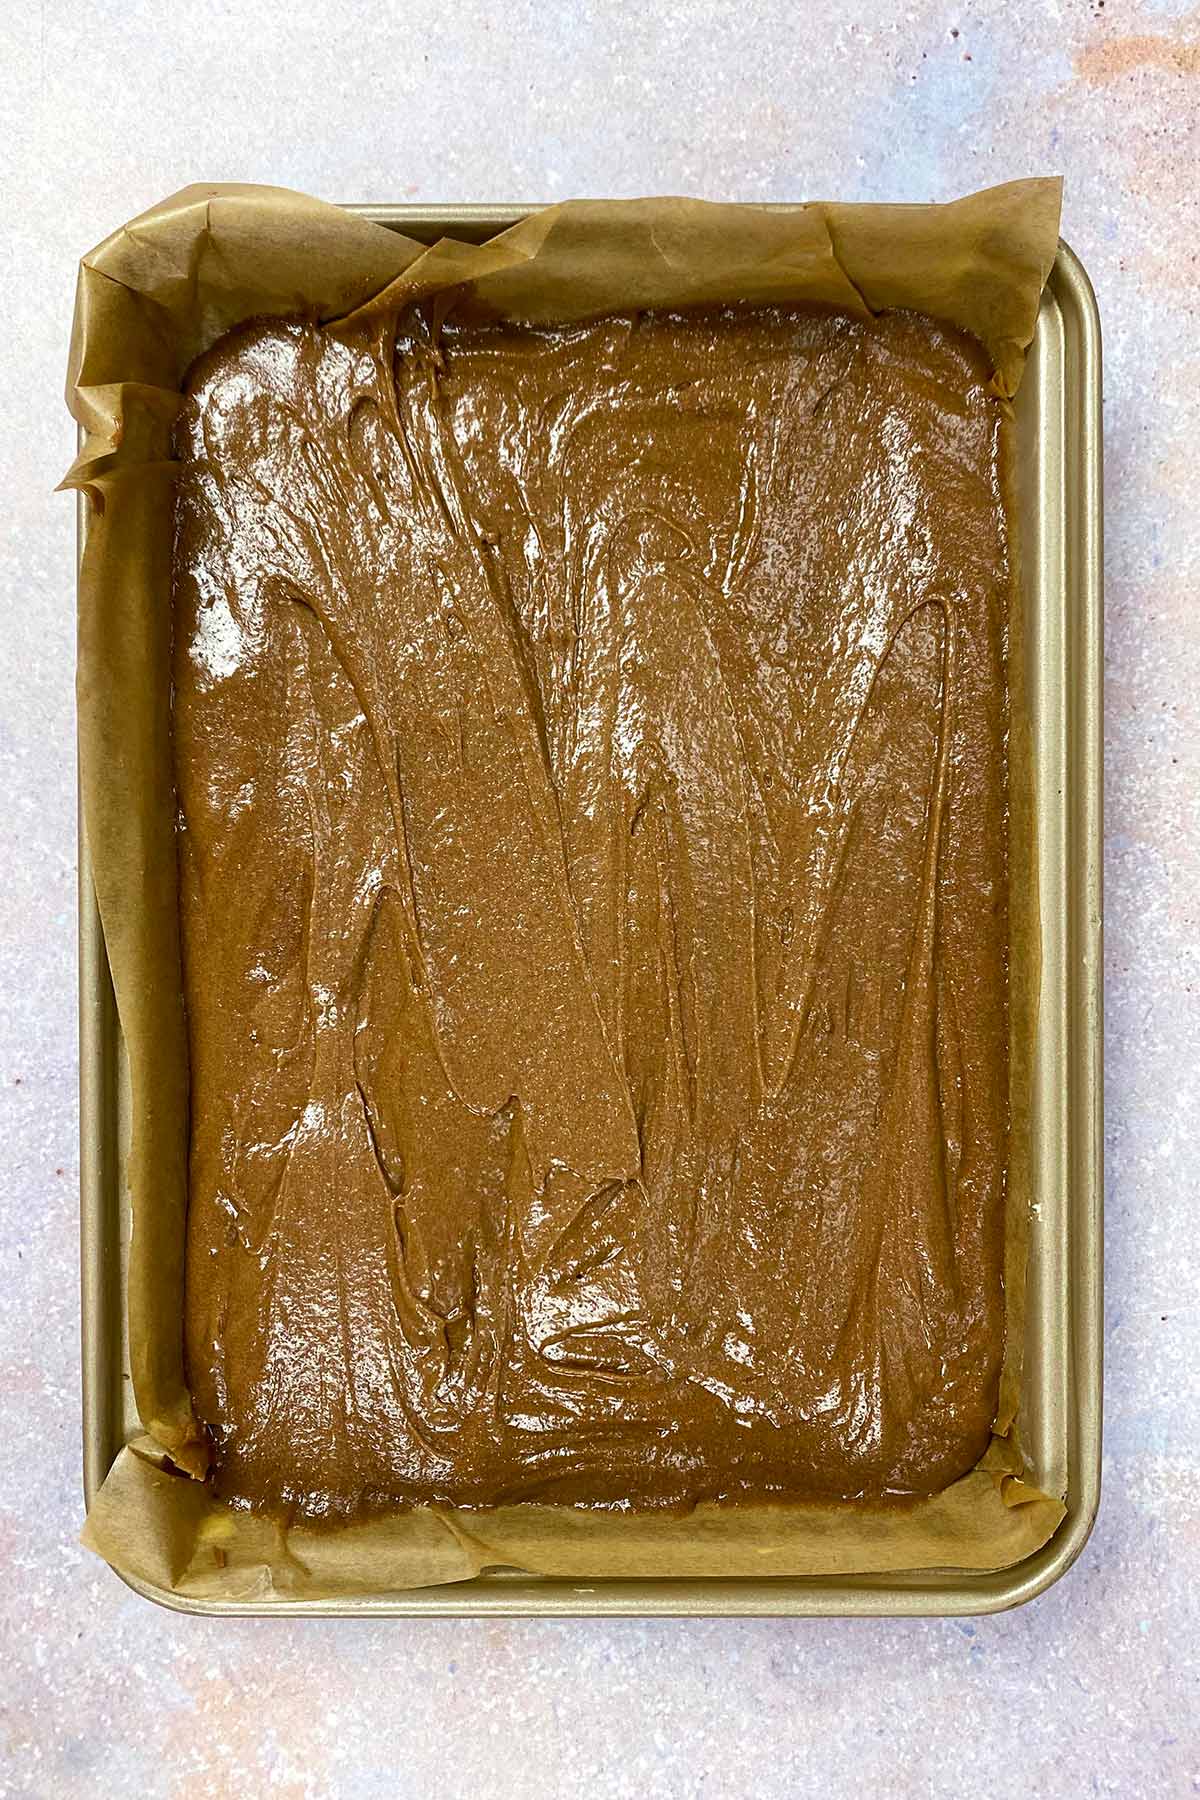 Brownie batter poured into a lined baking tray.